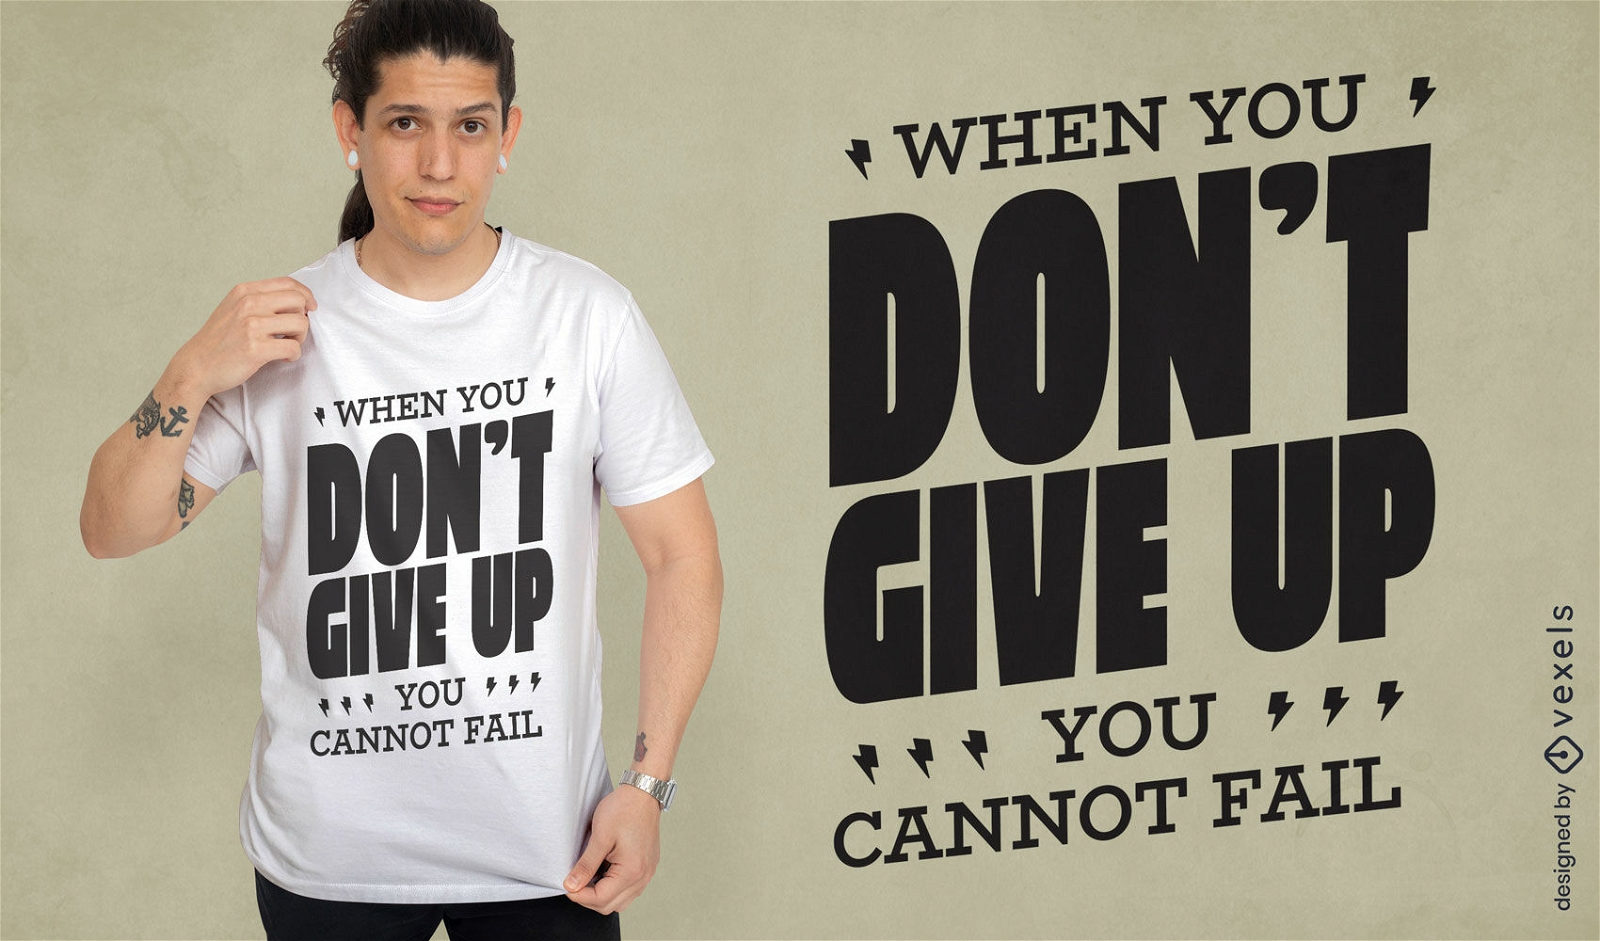 Do not give up motivational quote t-shirt design